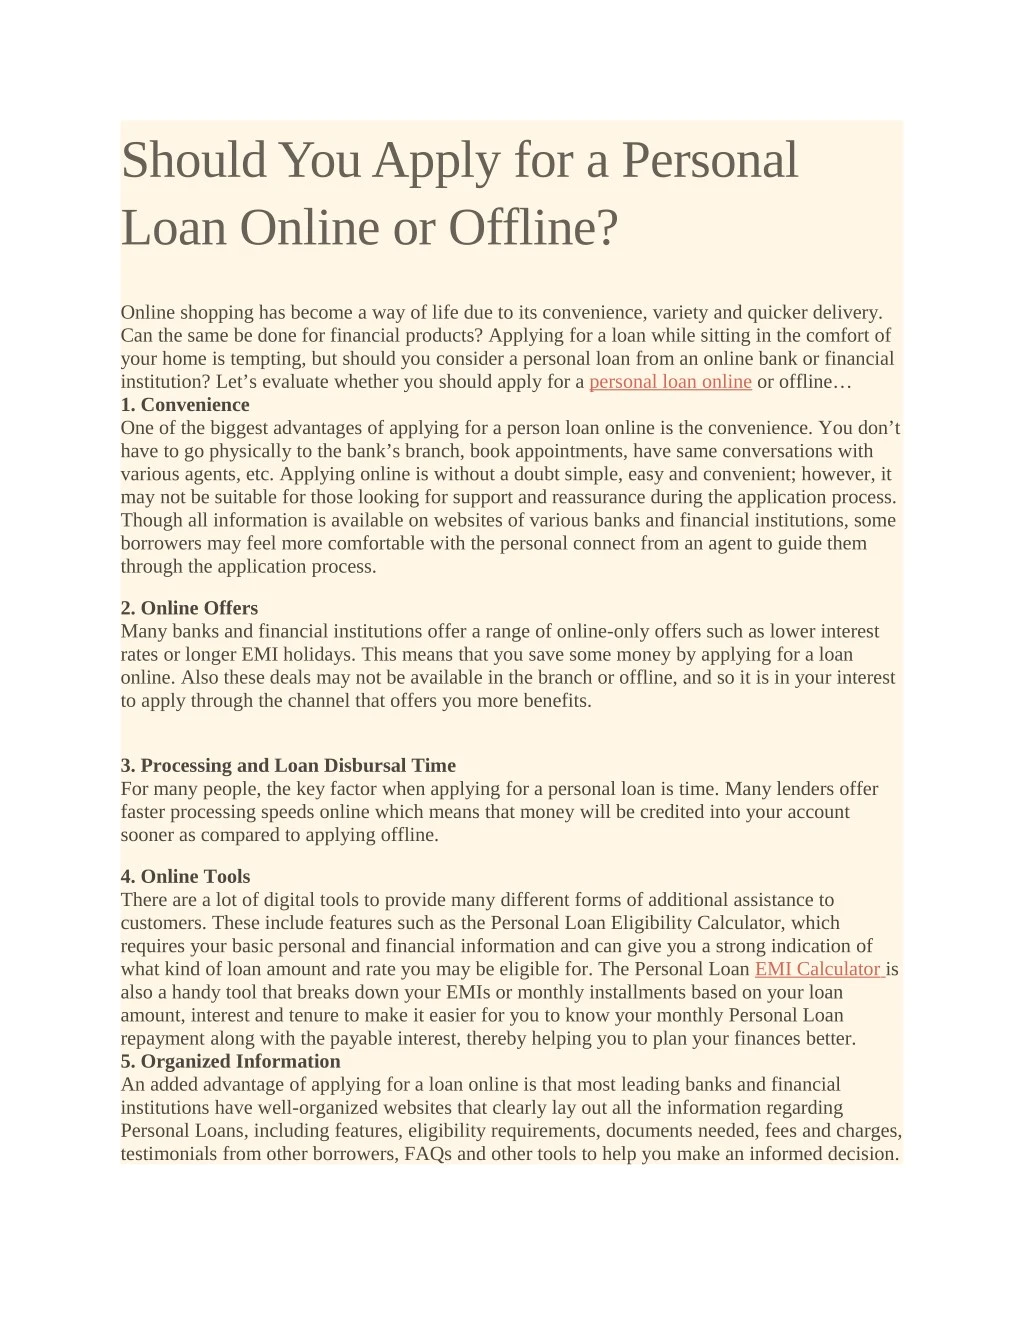 should you apply for a personal loan online